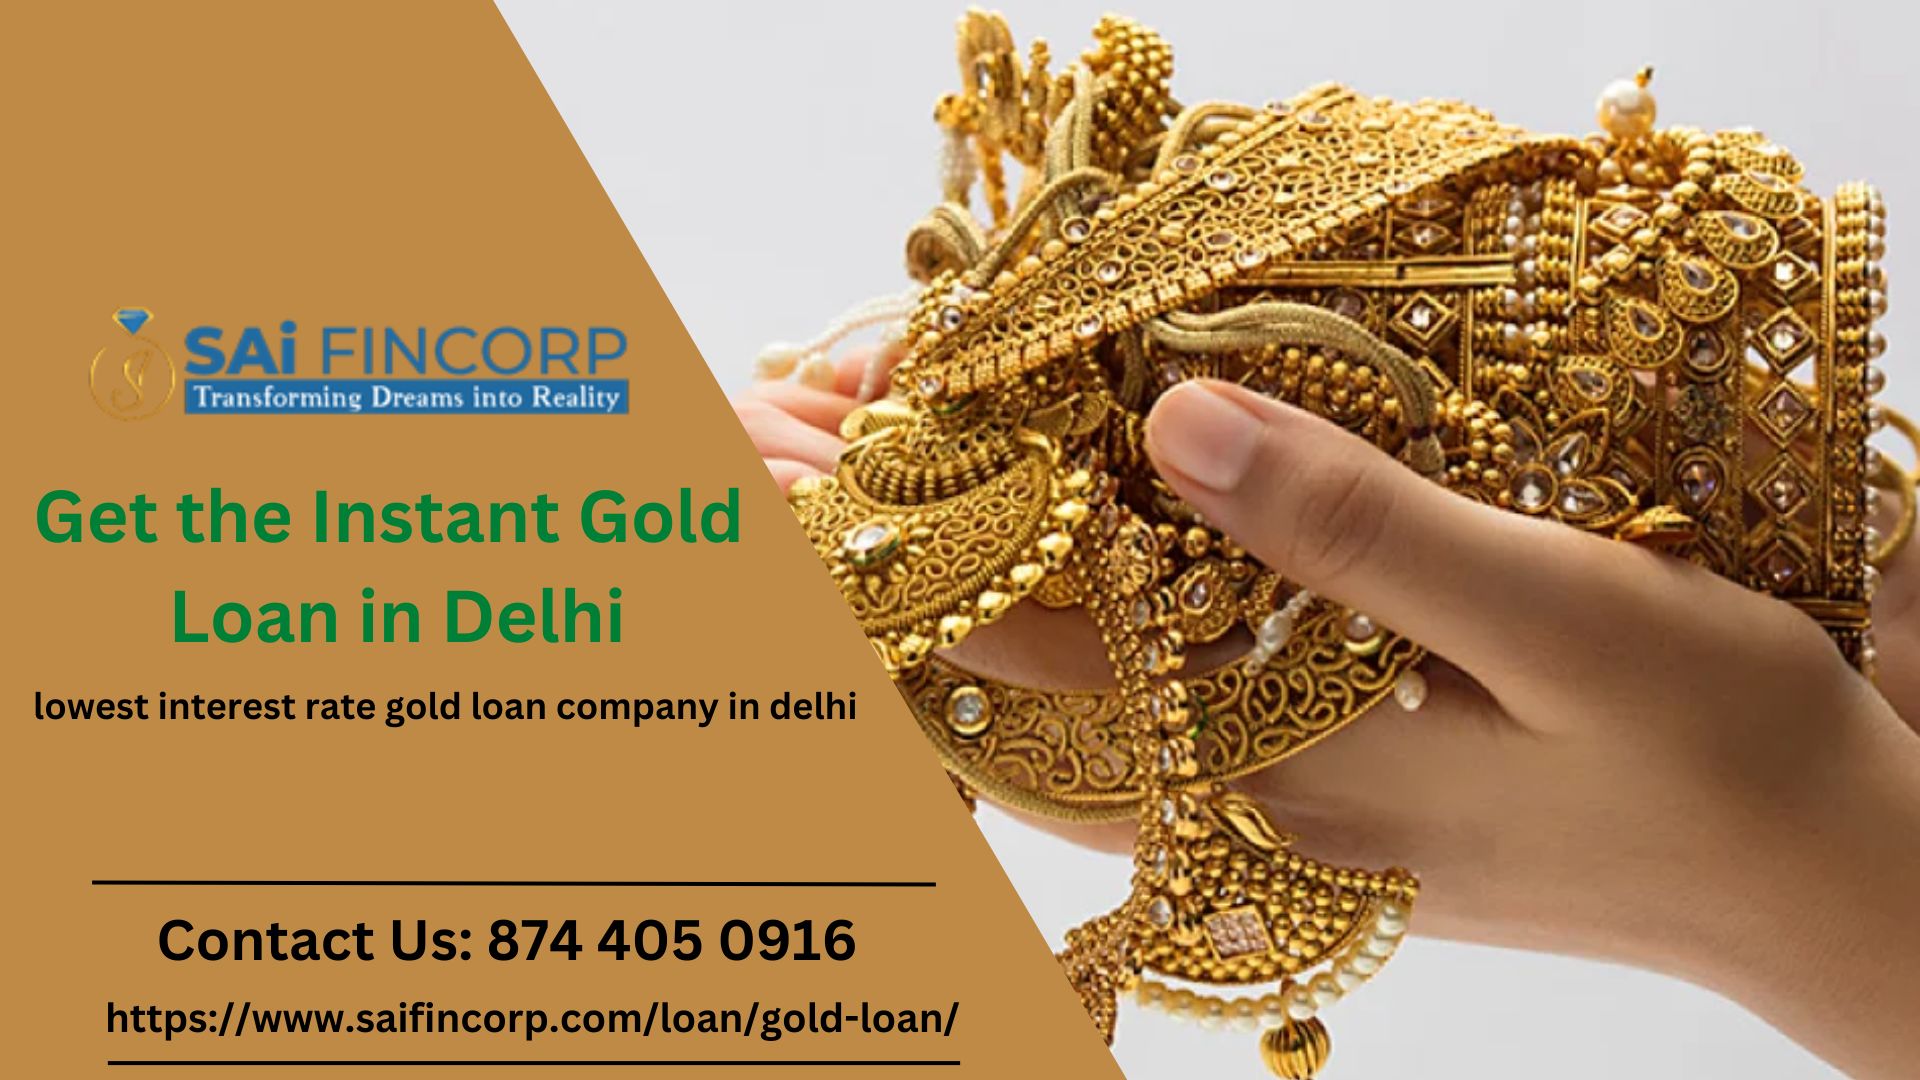 Get Instant Gold Loan in Delhi at Sai Fincorp - Classified Ads Shop